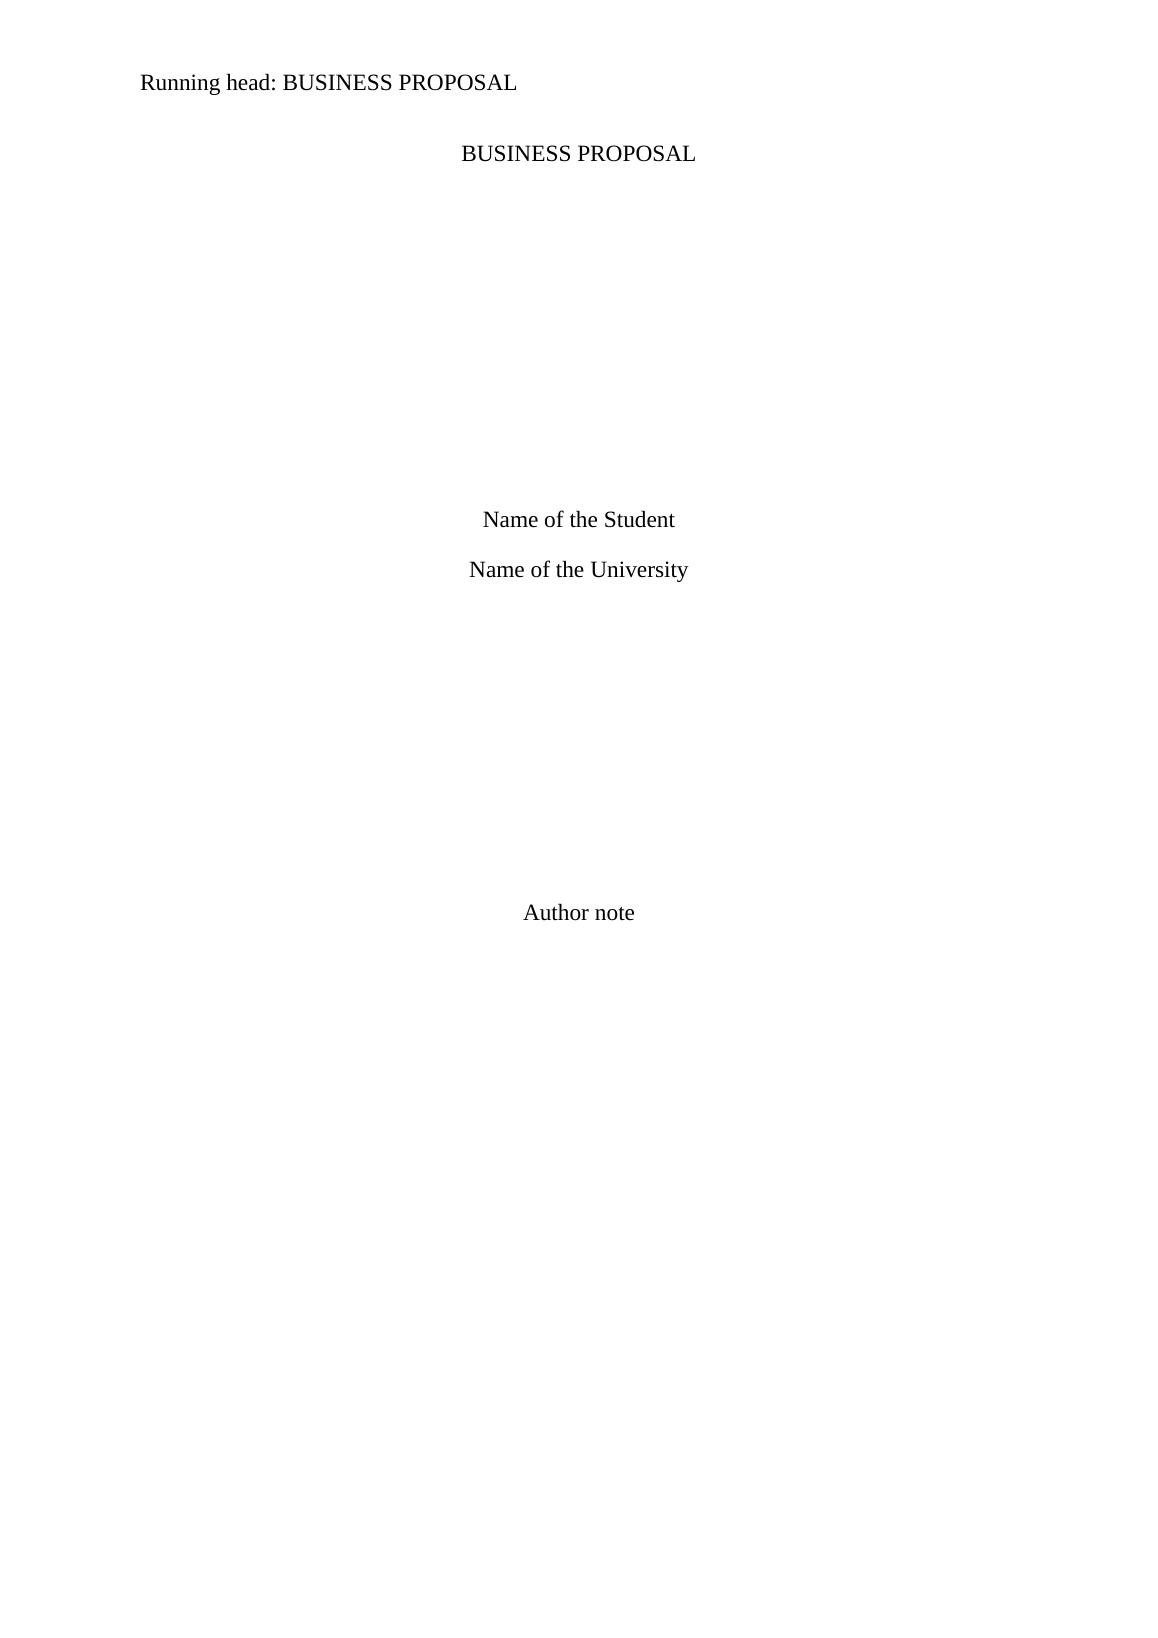 Paper On Business Proposal for Organization_1